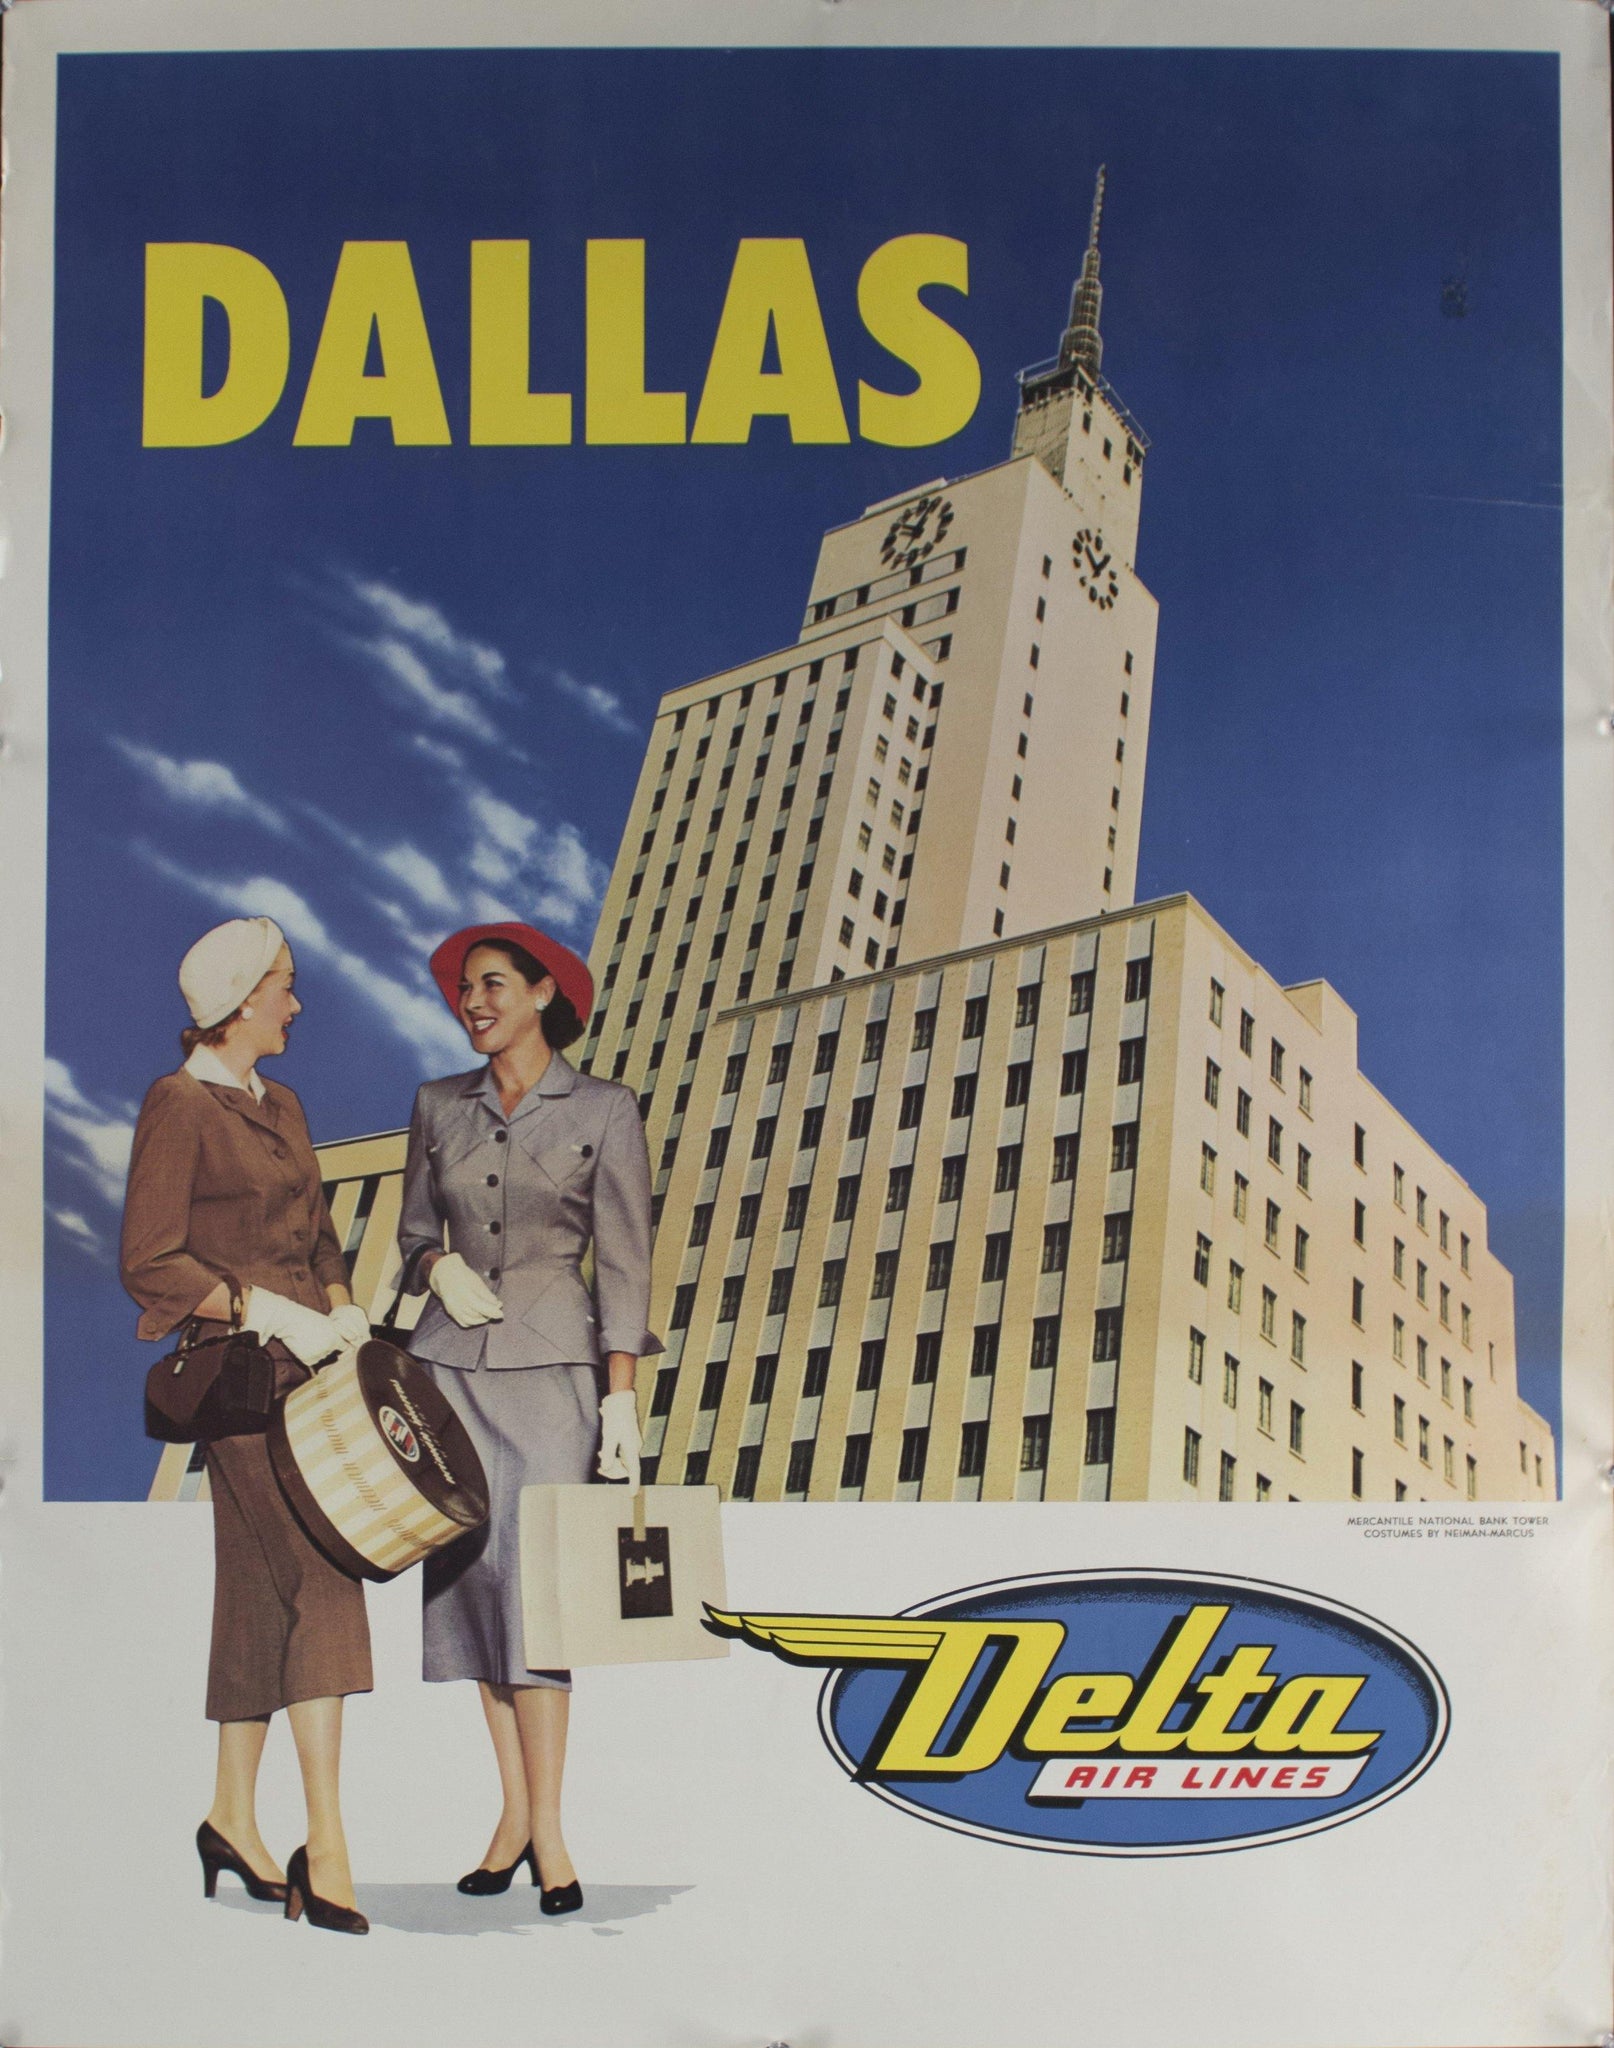 c. 1950 Dallas | Delta Air Lines | Mercantile National Bank Tower - Golden Age Posters